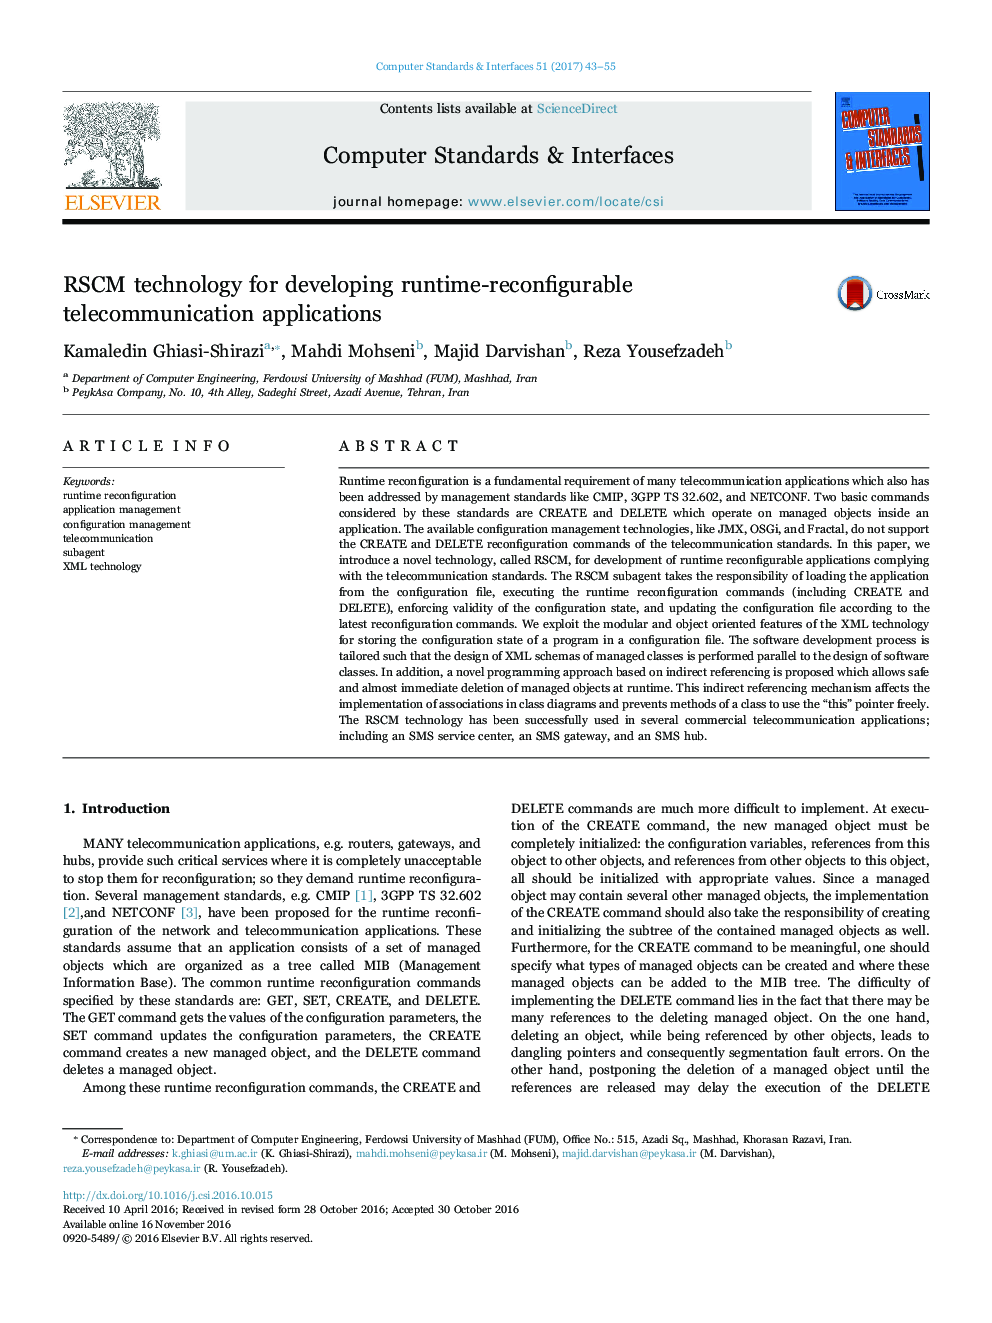 RSCM technology for developing runtime-reconfigurable telecommunication applications